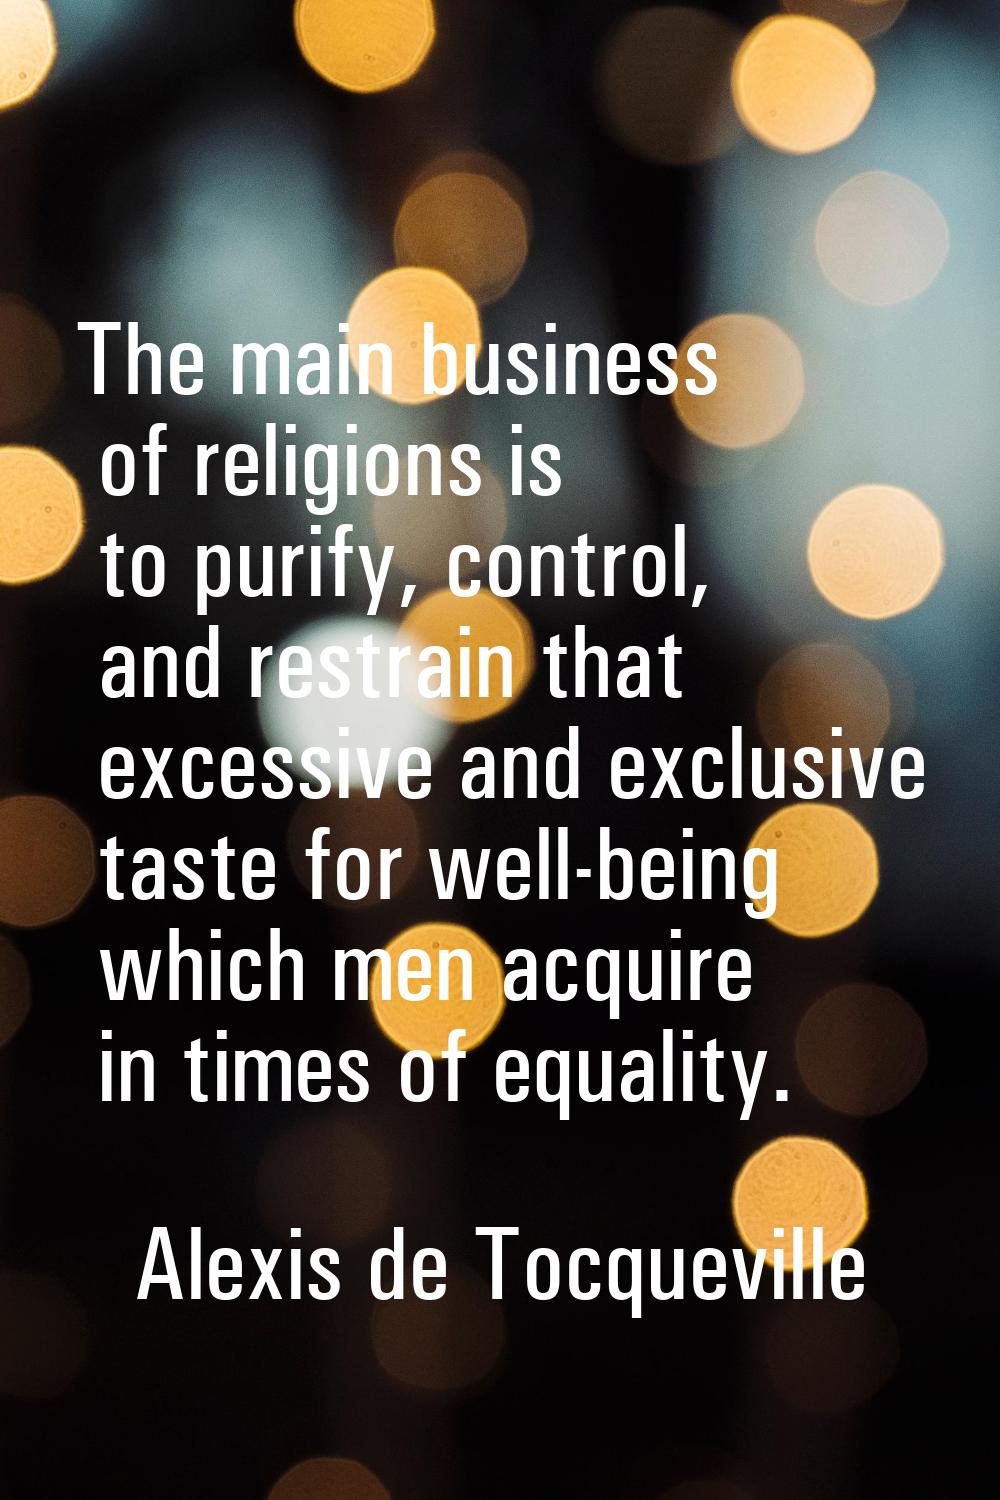 The main business of religions is to purify, control, and restrain that excessive and exclusive tas